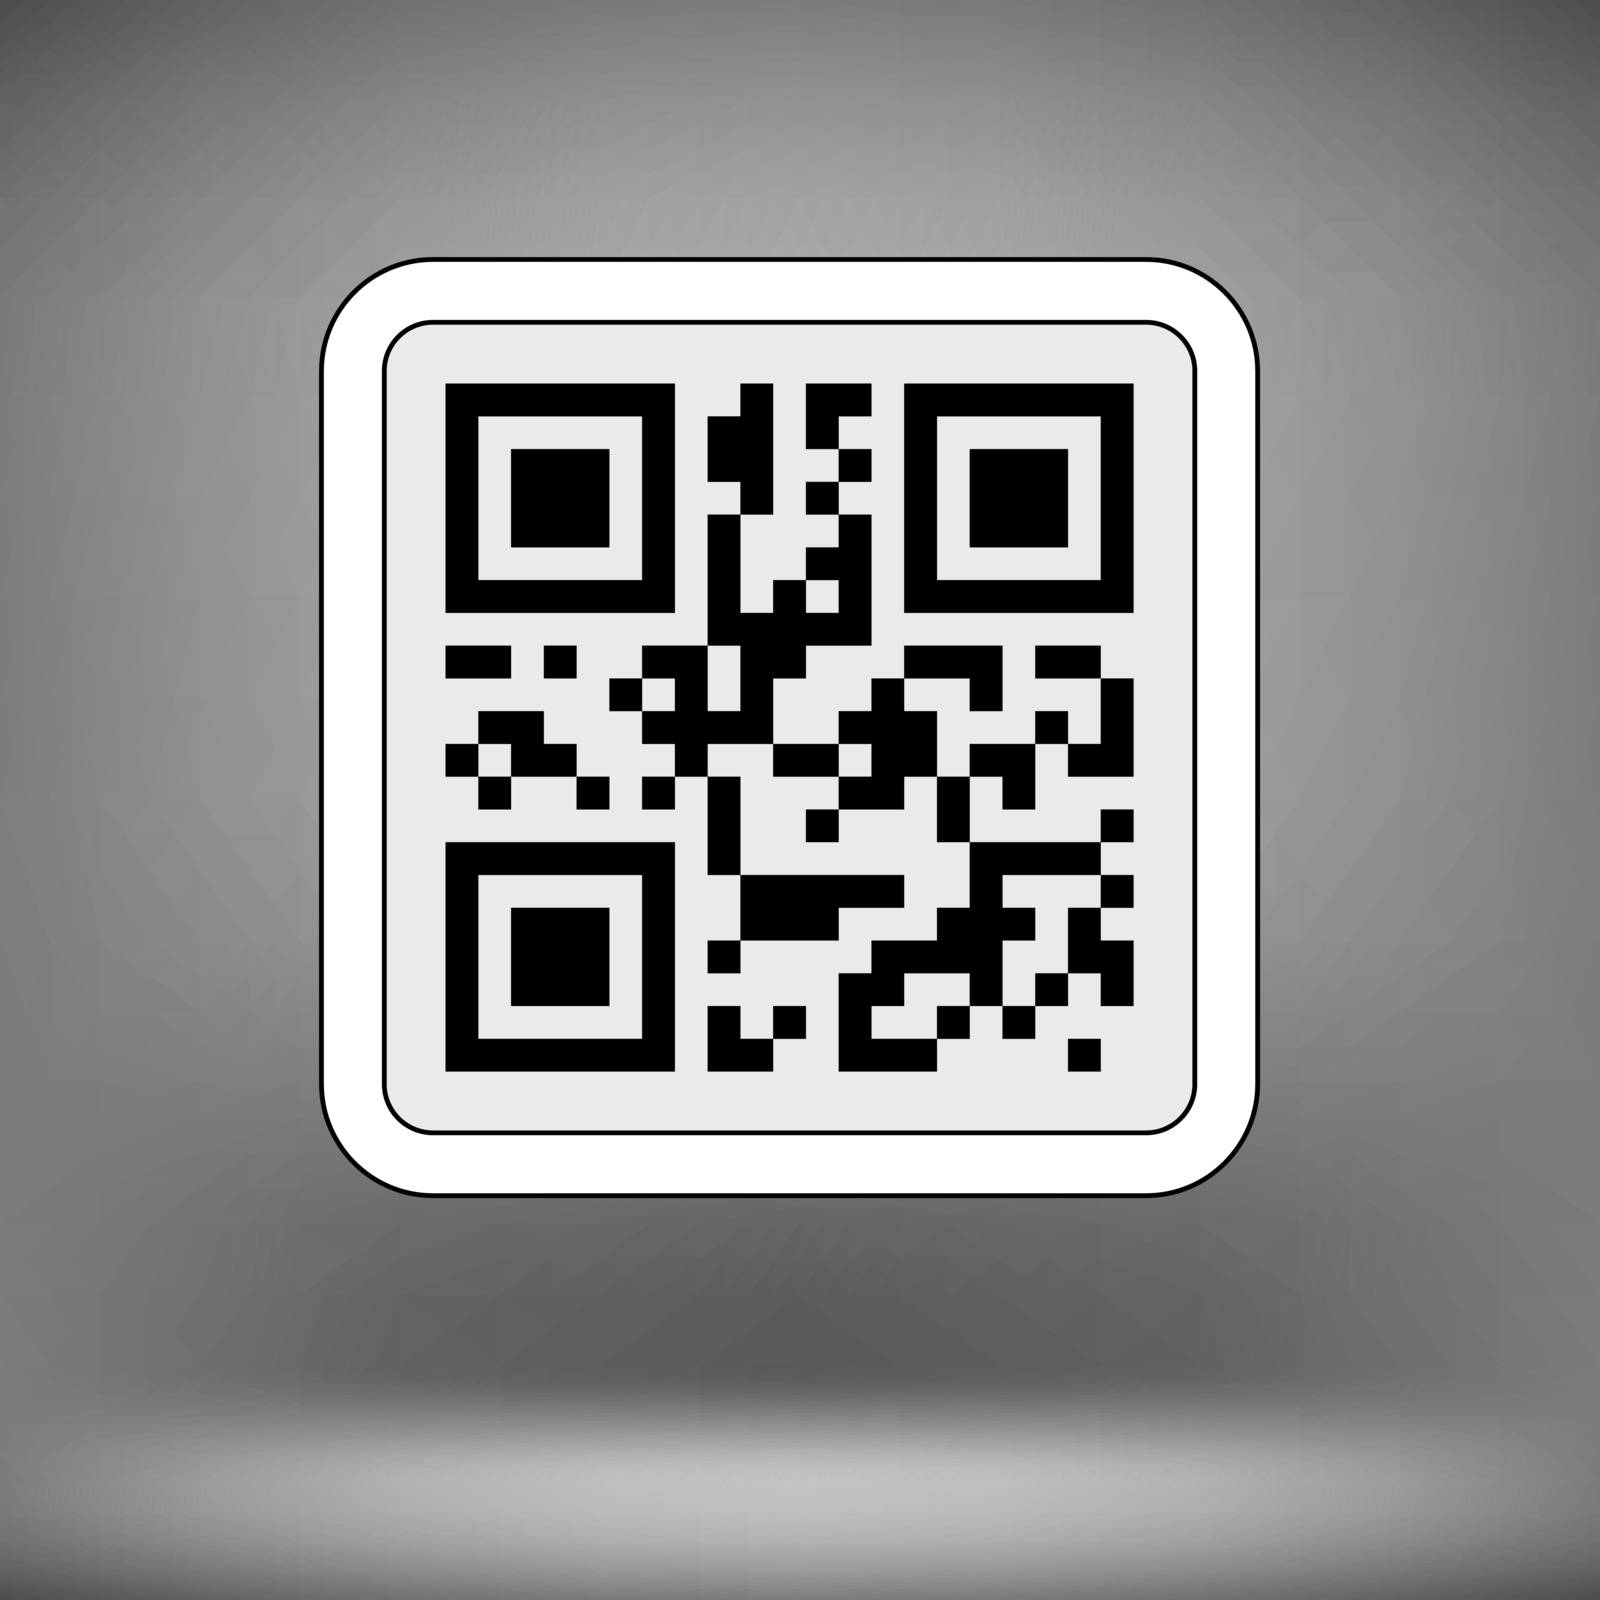 Product Barcode 2d Square Label on Soft Grey Background. Sample QR Code Ready to Scan with Smart Phone